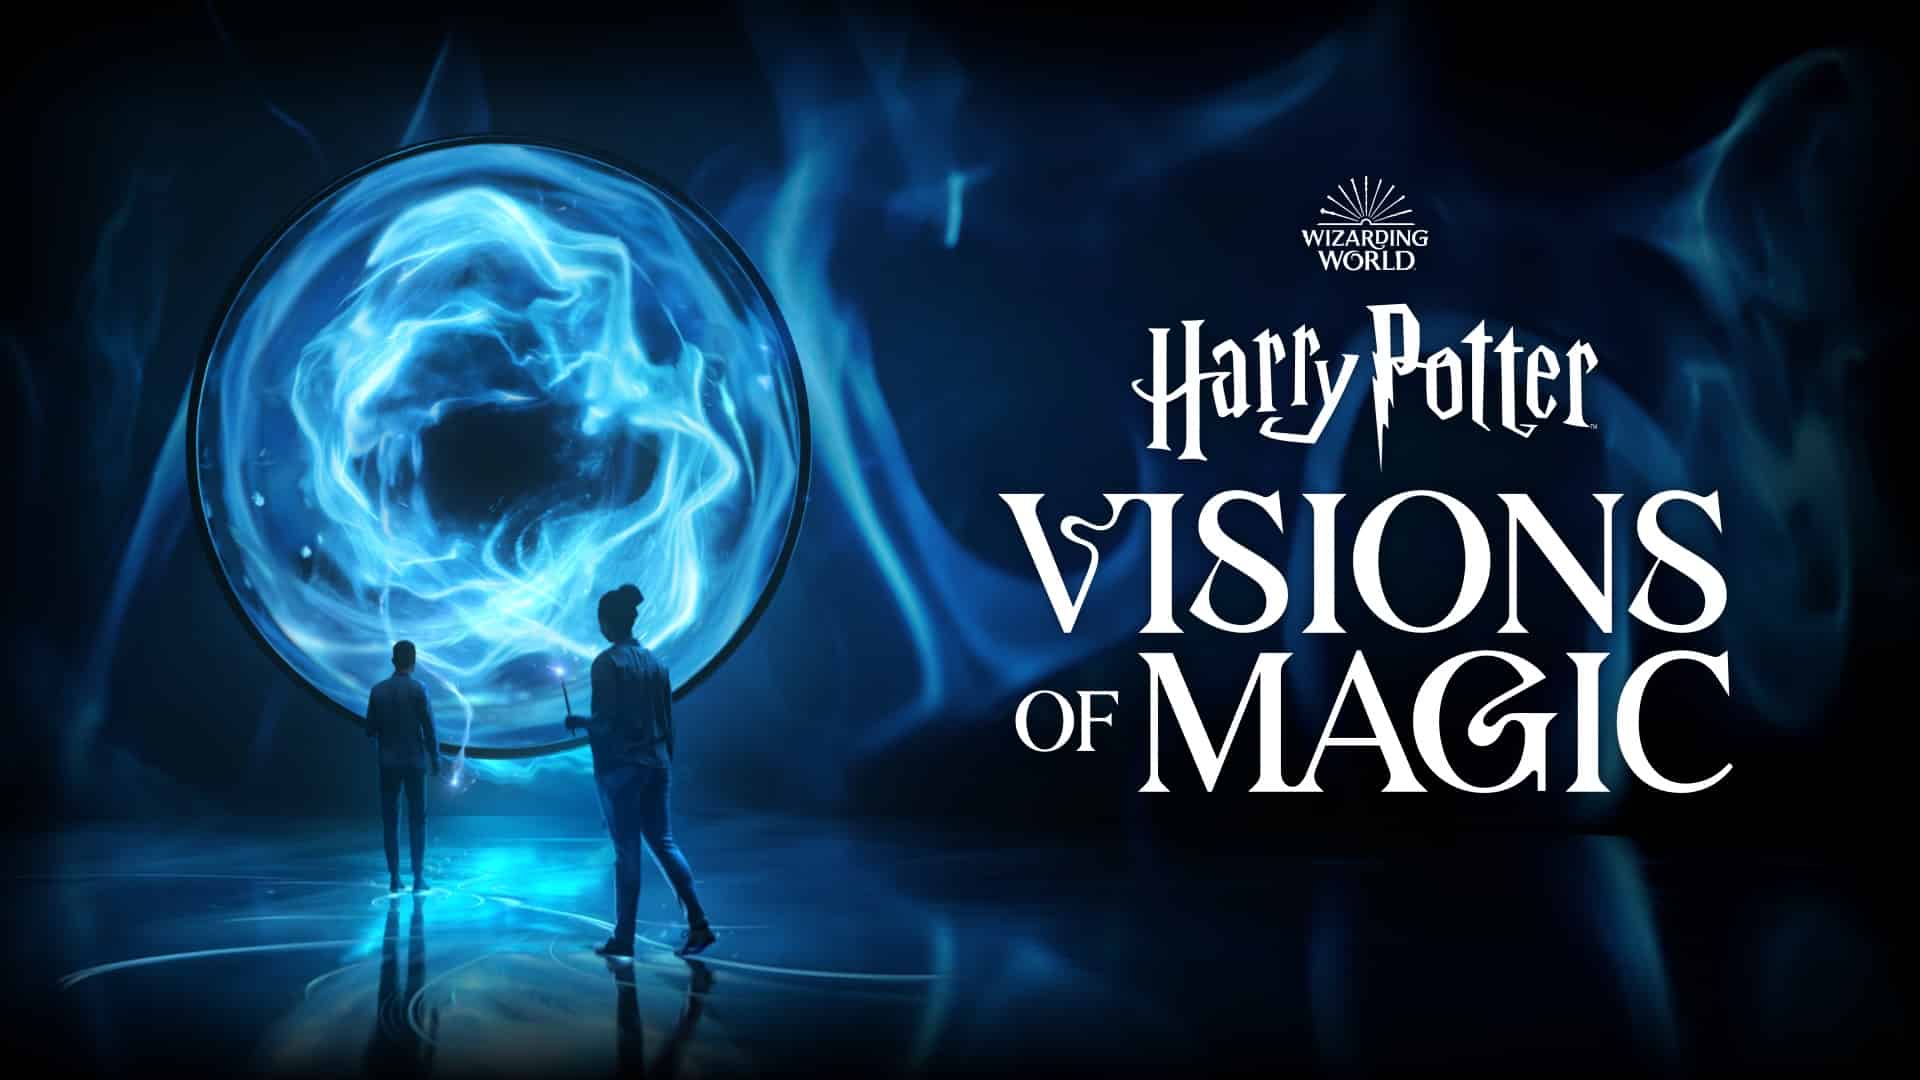 Harry-Potter-Visions-of-Magic-shareable